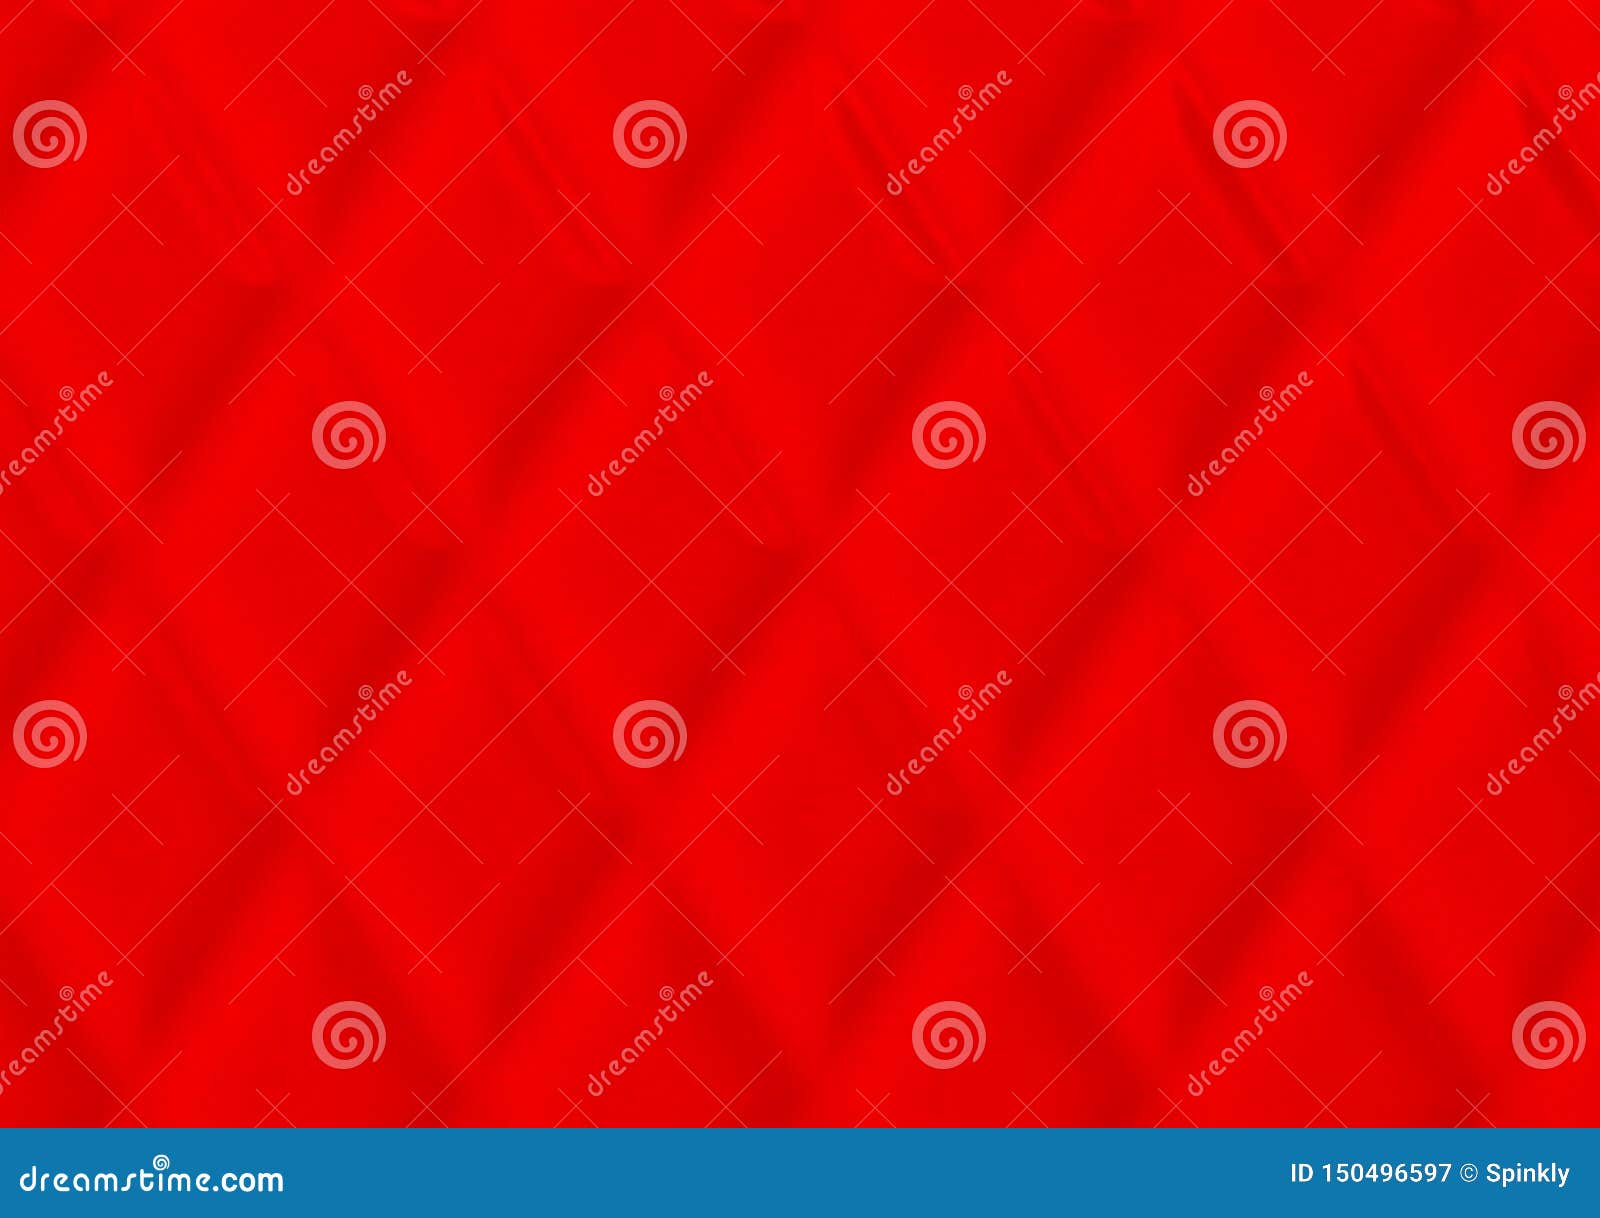 Red Textured Cushion Background Design for Wallpaper Stock Image - Image of  colour, shade: 150496597